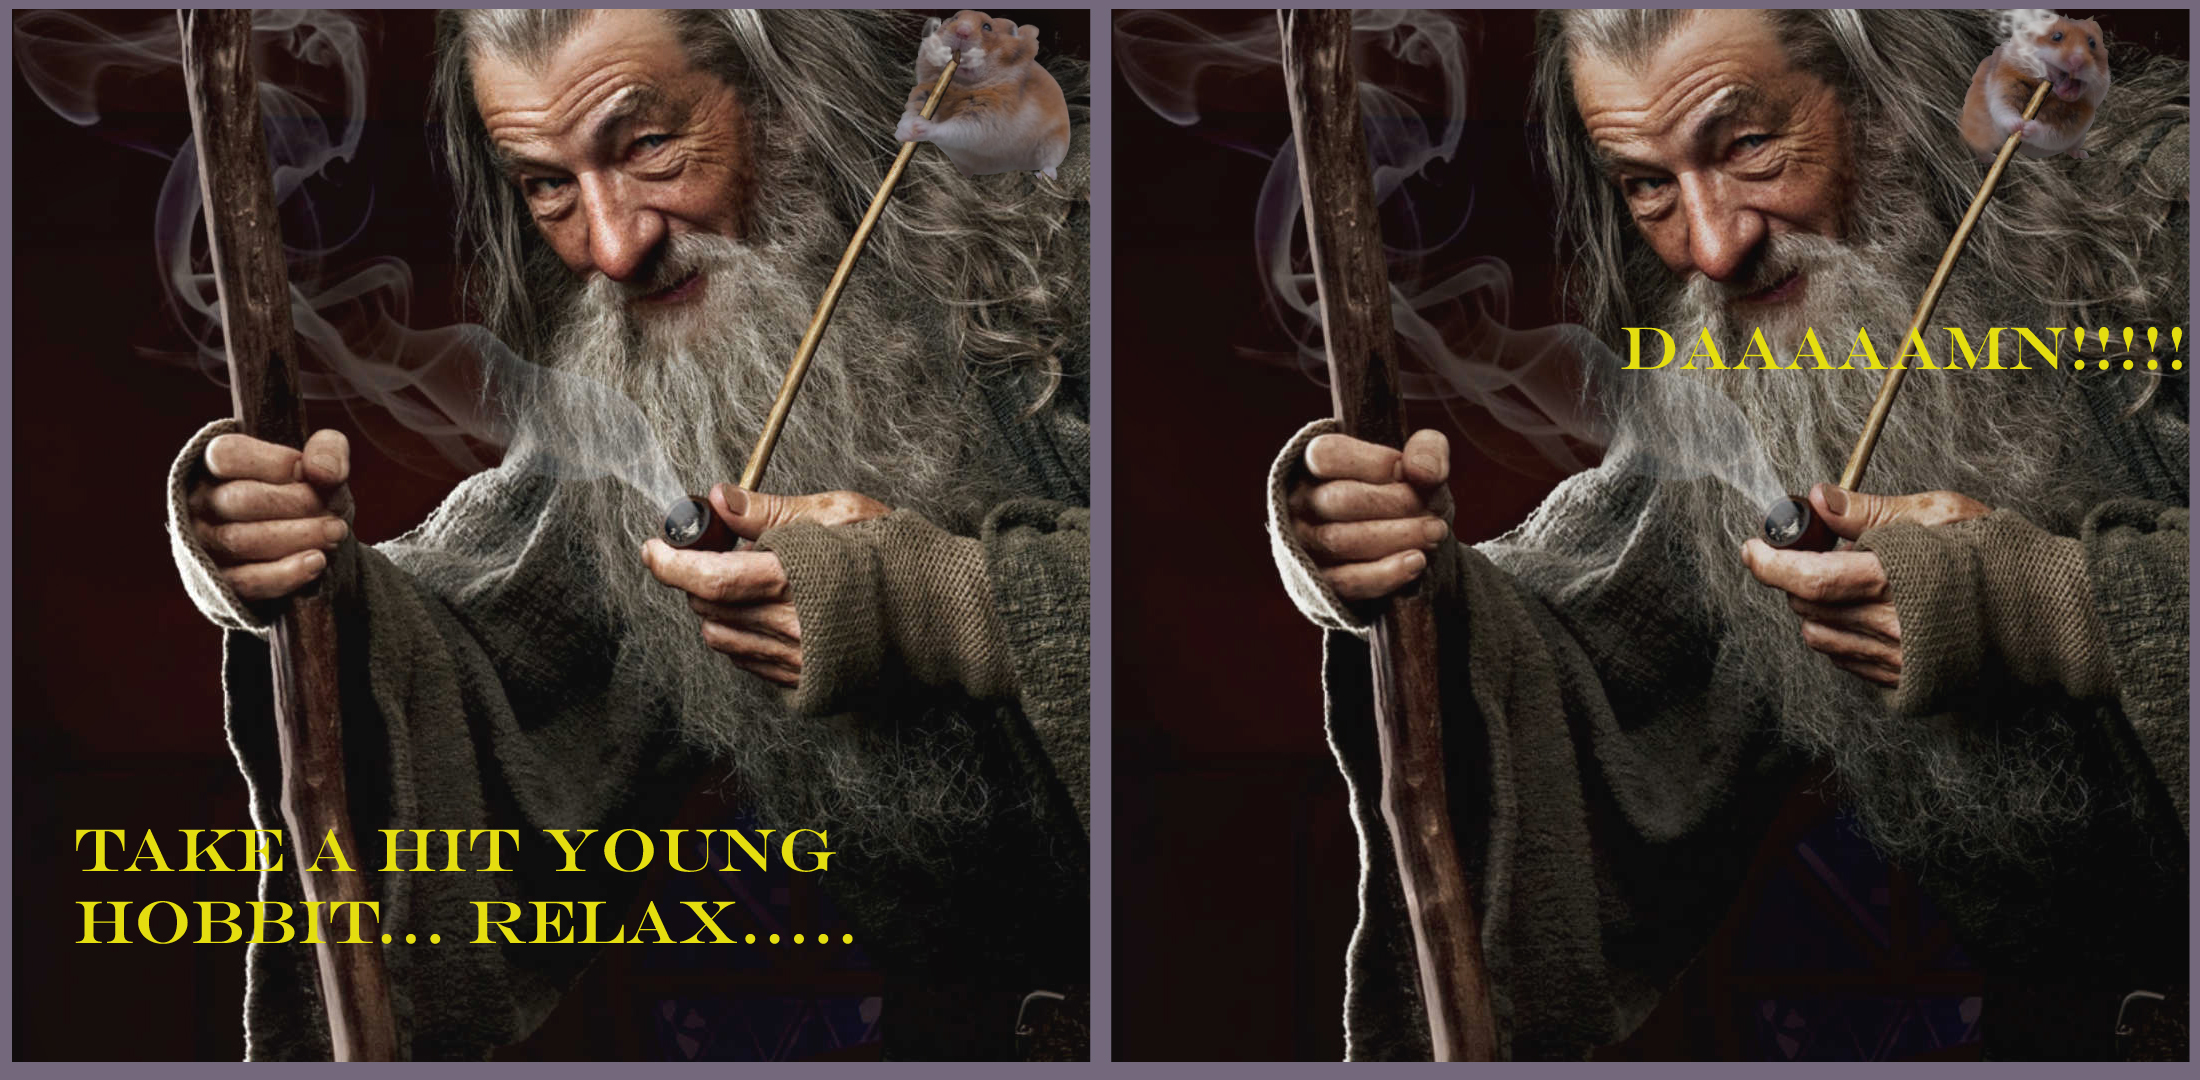 Gandalf The Grey from "The Hobbit" sharing his pipe with a small friend....